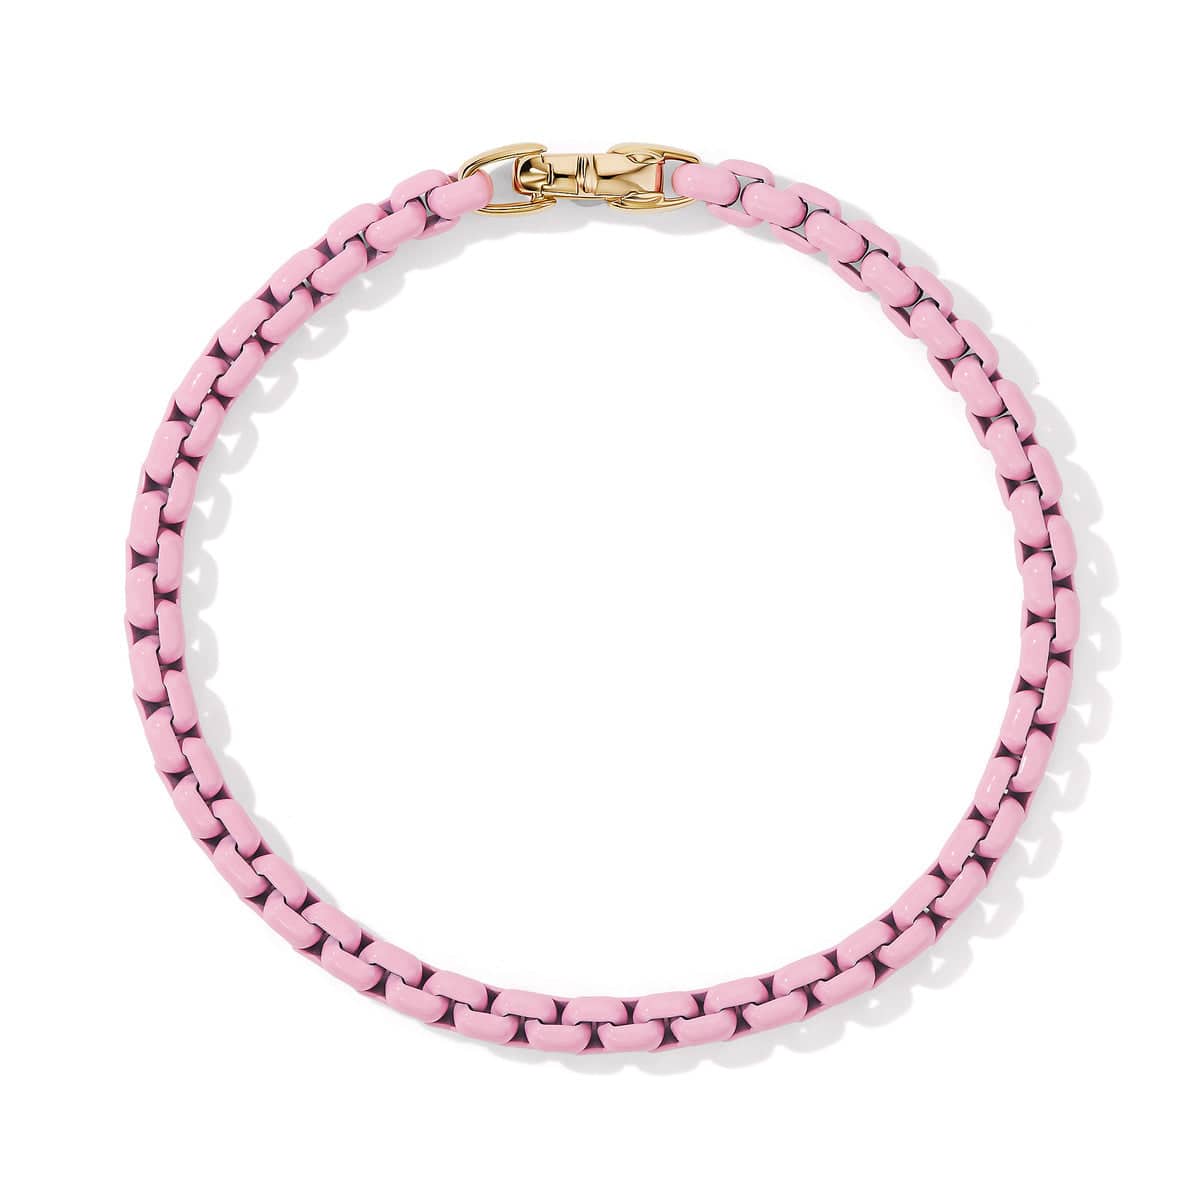 DY Bel Aire Chain Bracelet in Blush with 14K Yellow Gold Accent